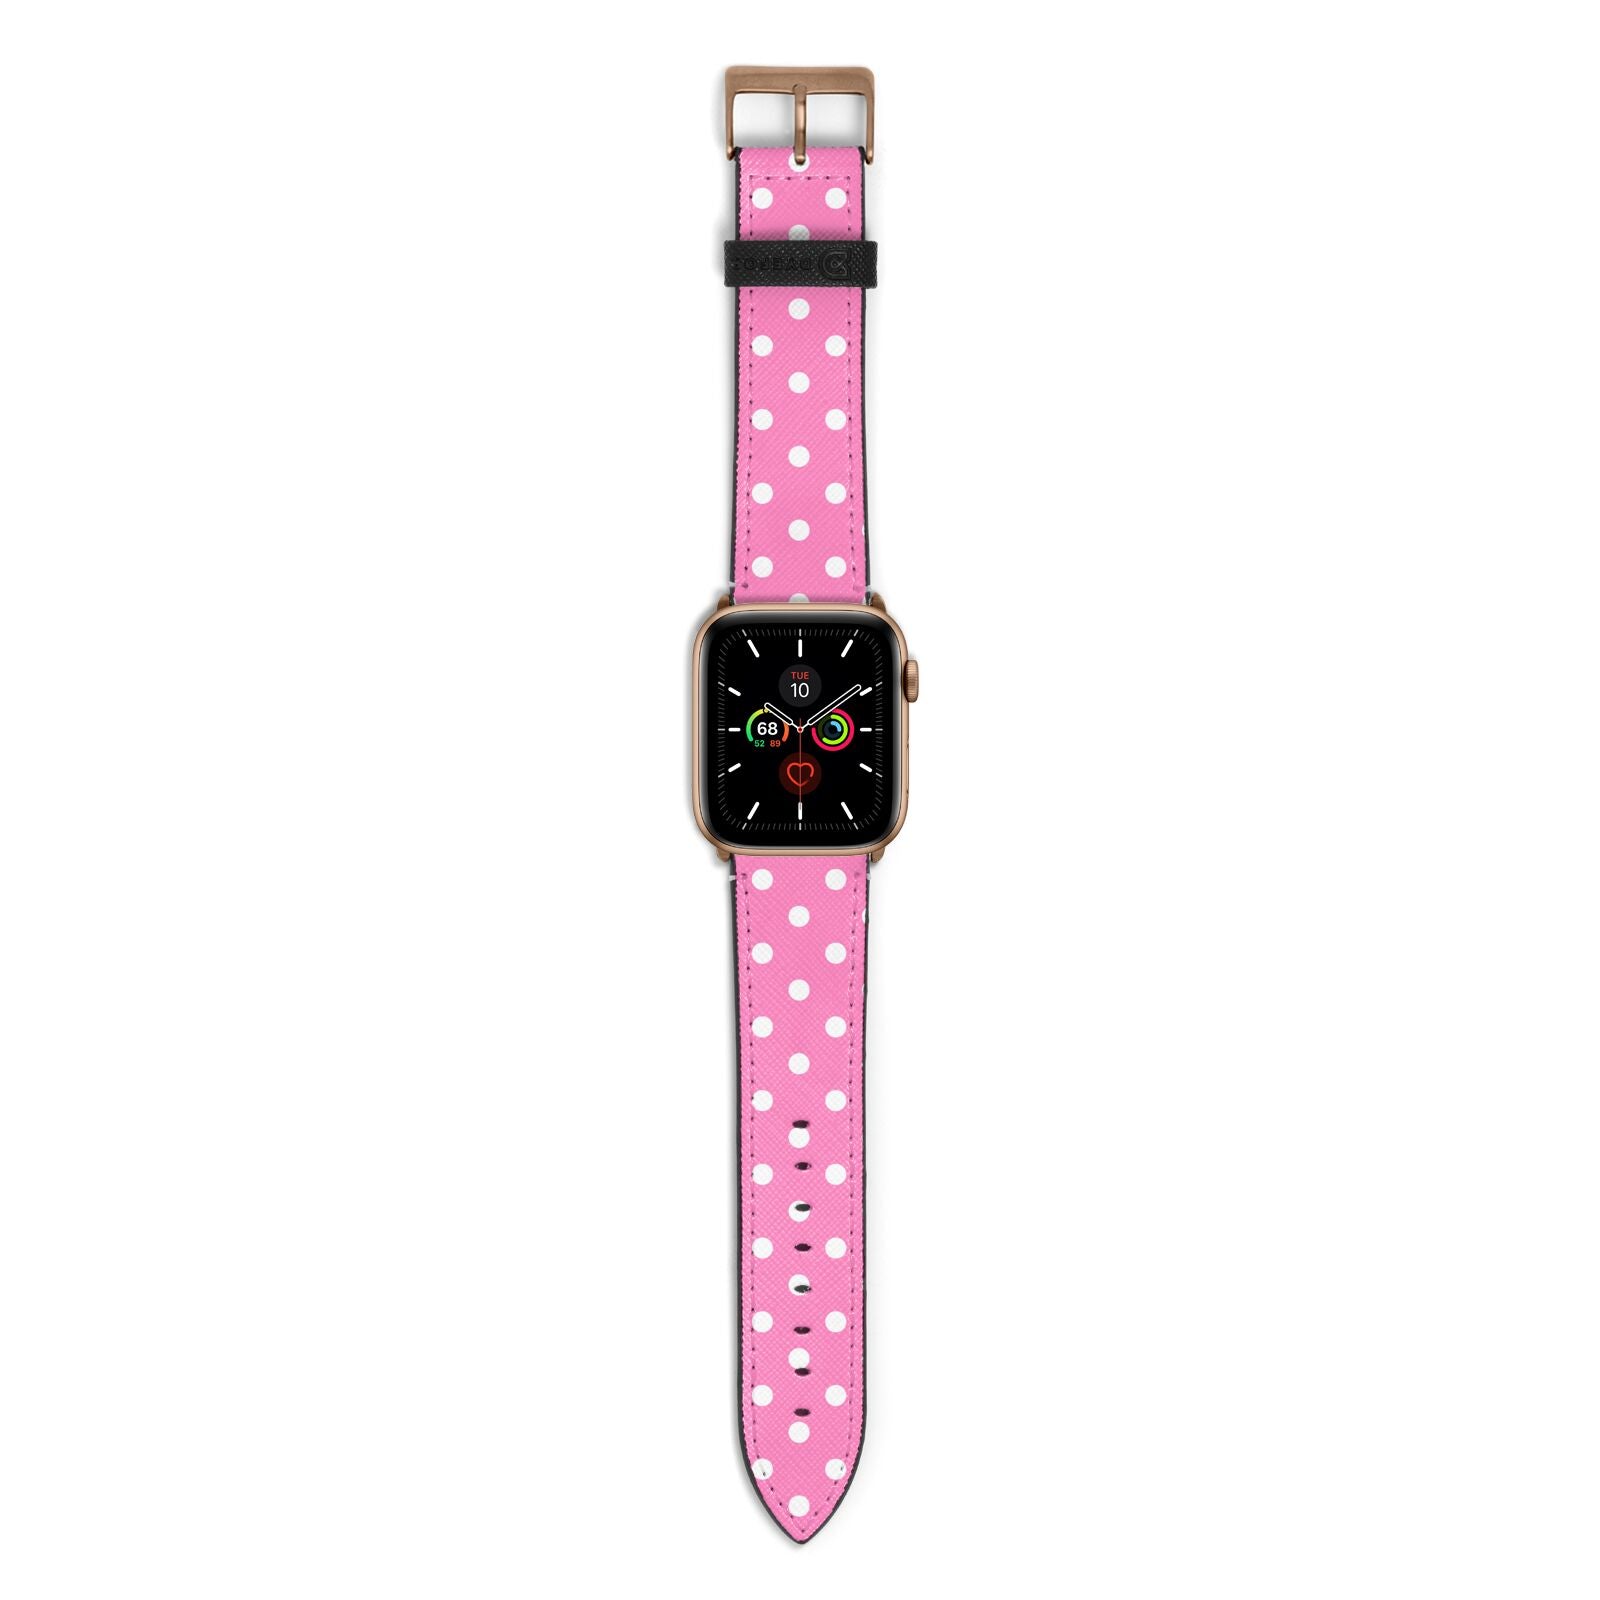 Pink Polka Dot Apple Watch Strap with Gold Hardware